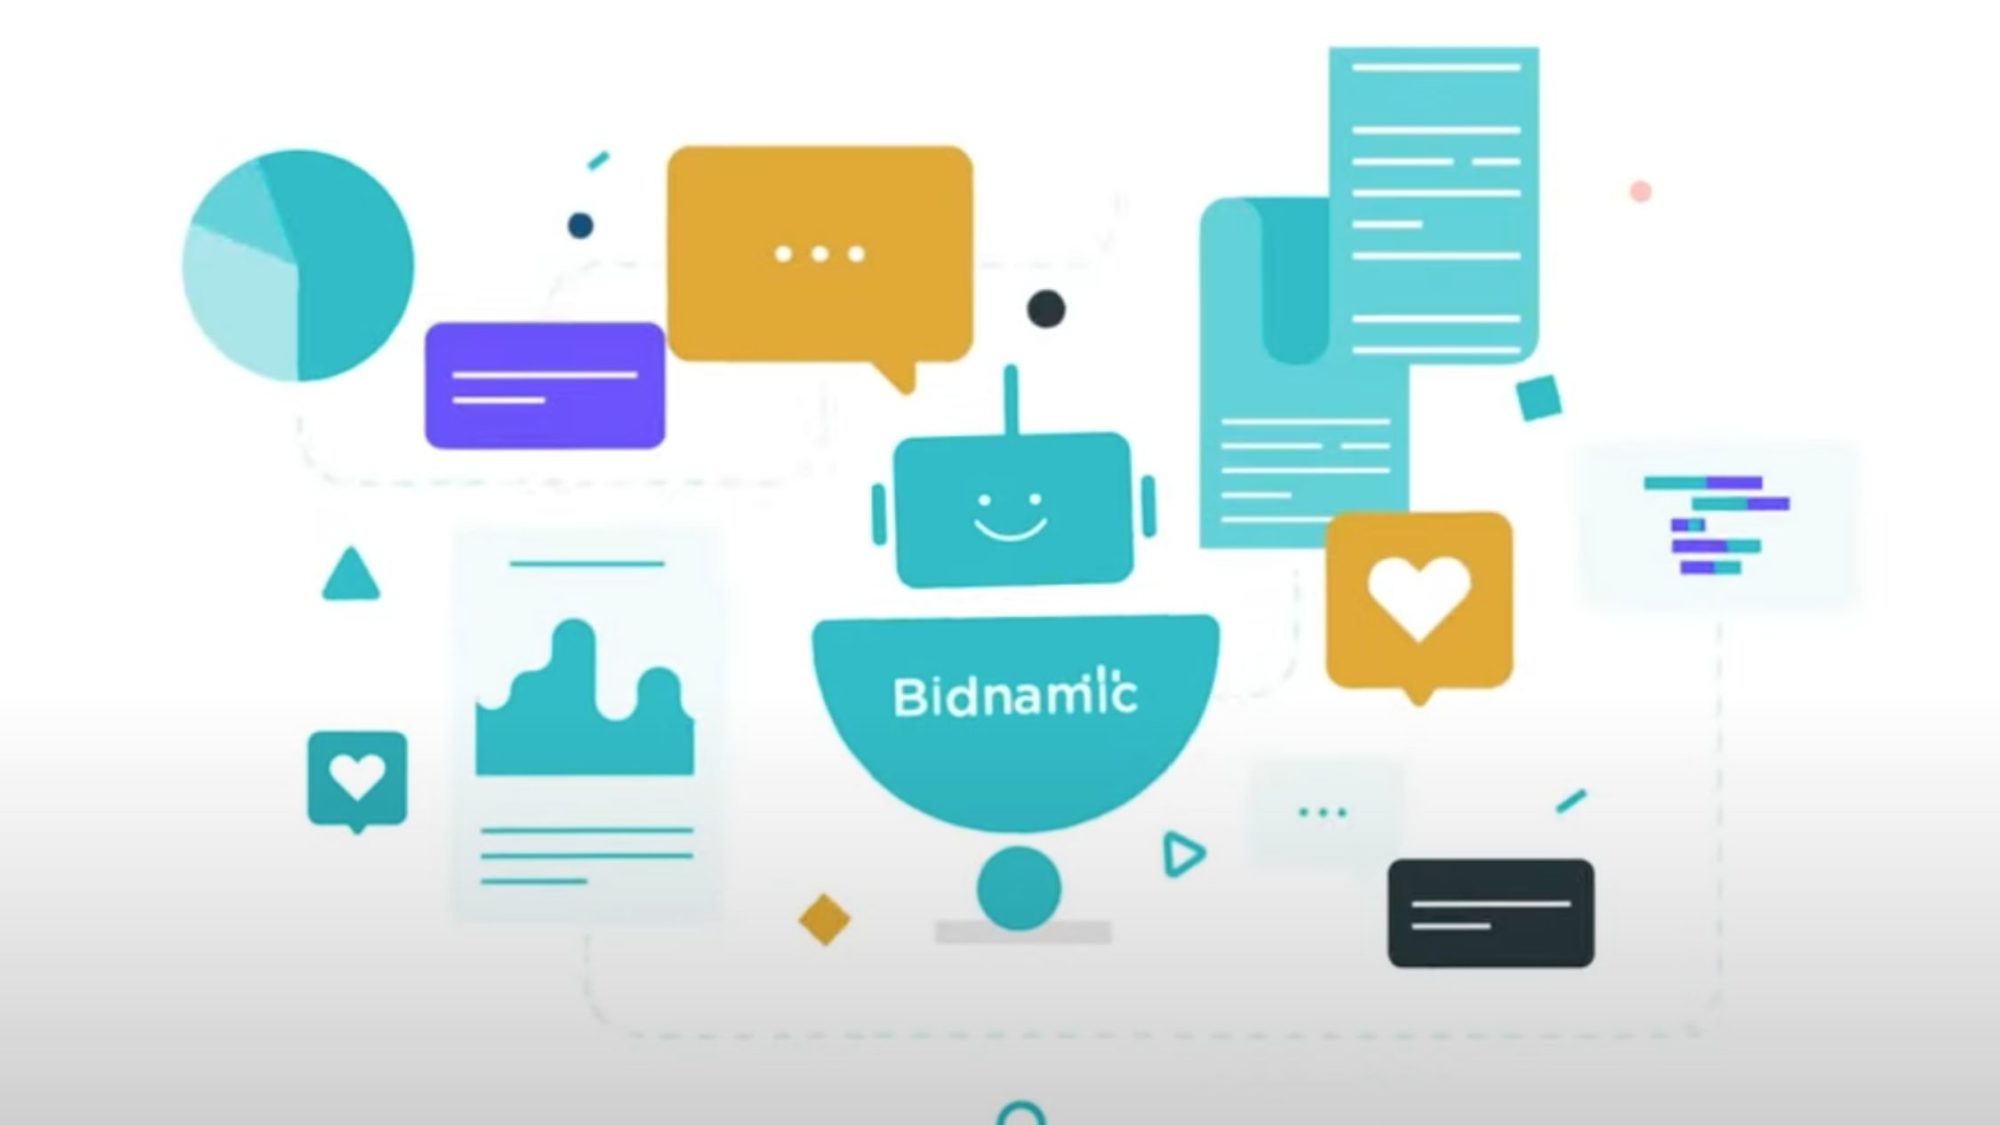 Bidnamic secures £4m series A funding